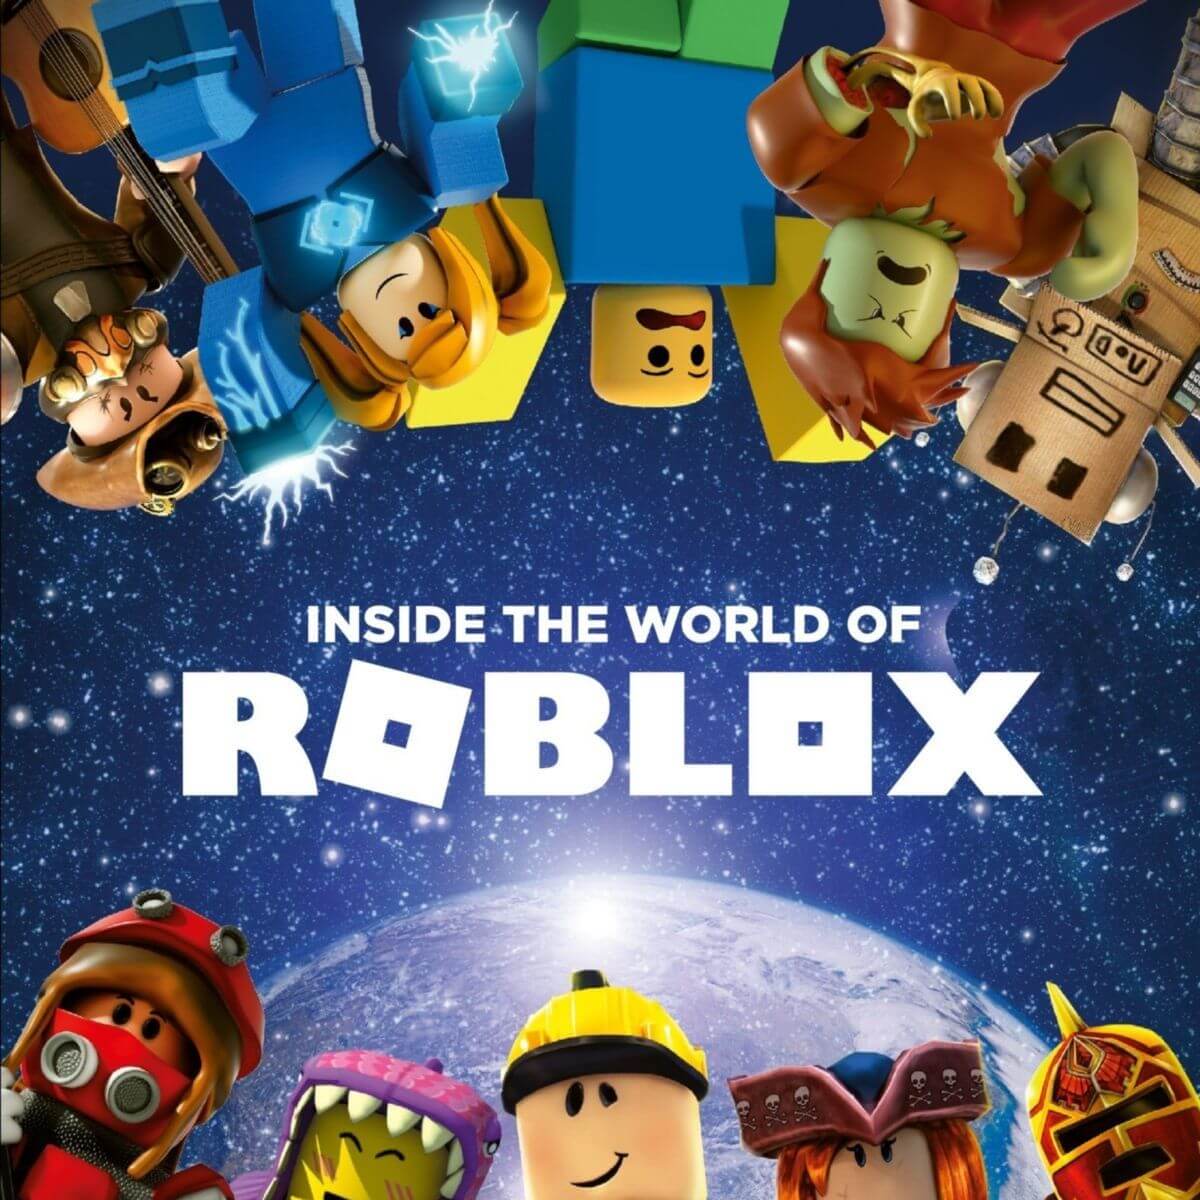 Roblox Free Play In Google